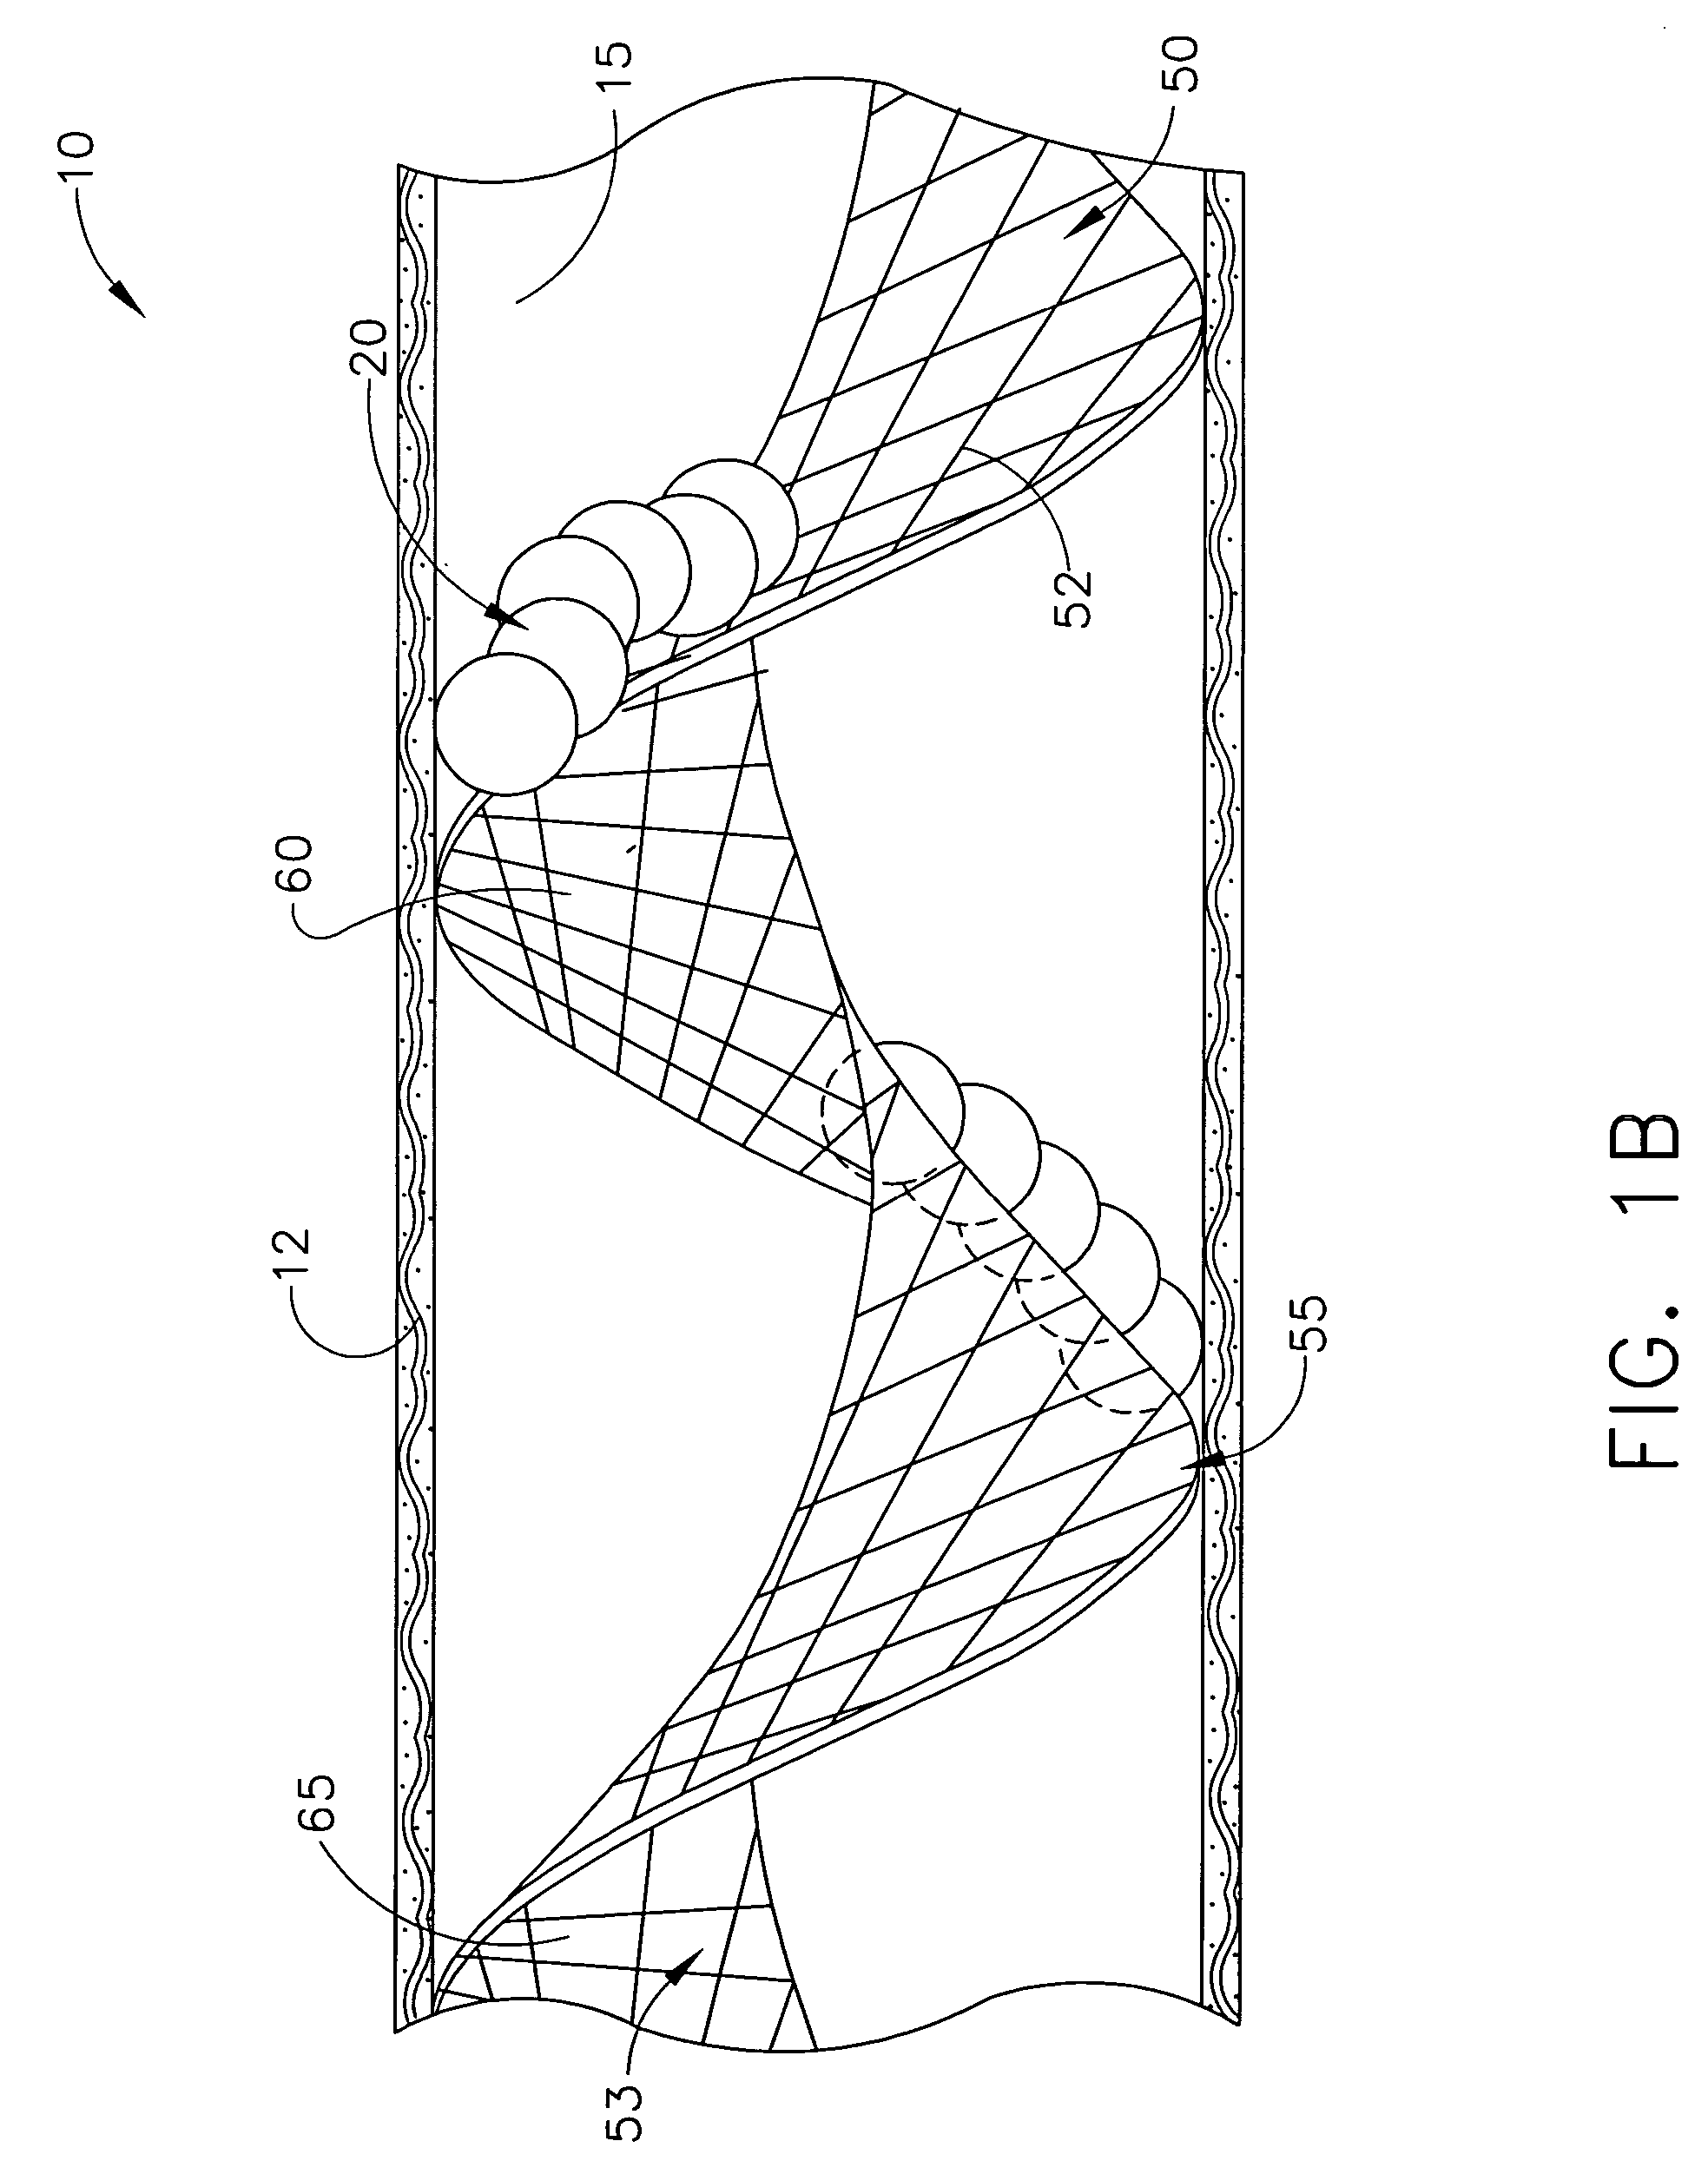 Method for filtering blood in a vessel with helical elements